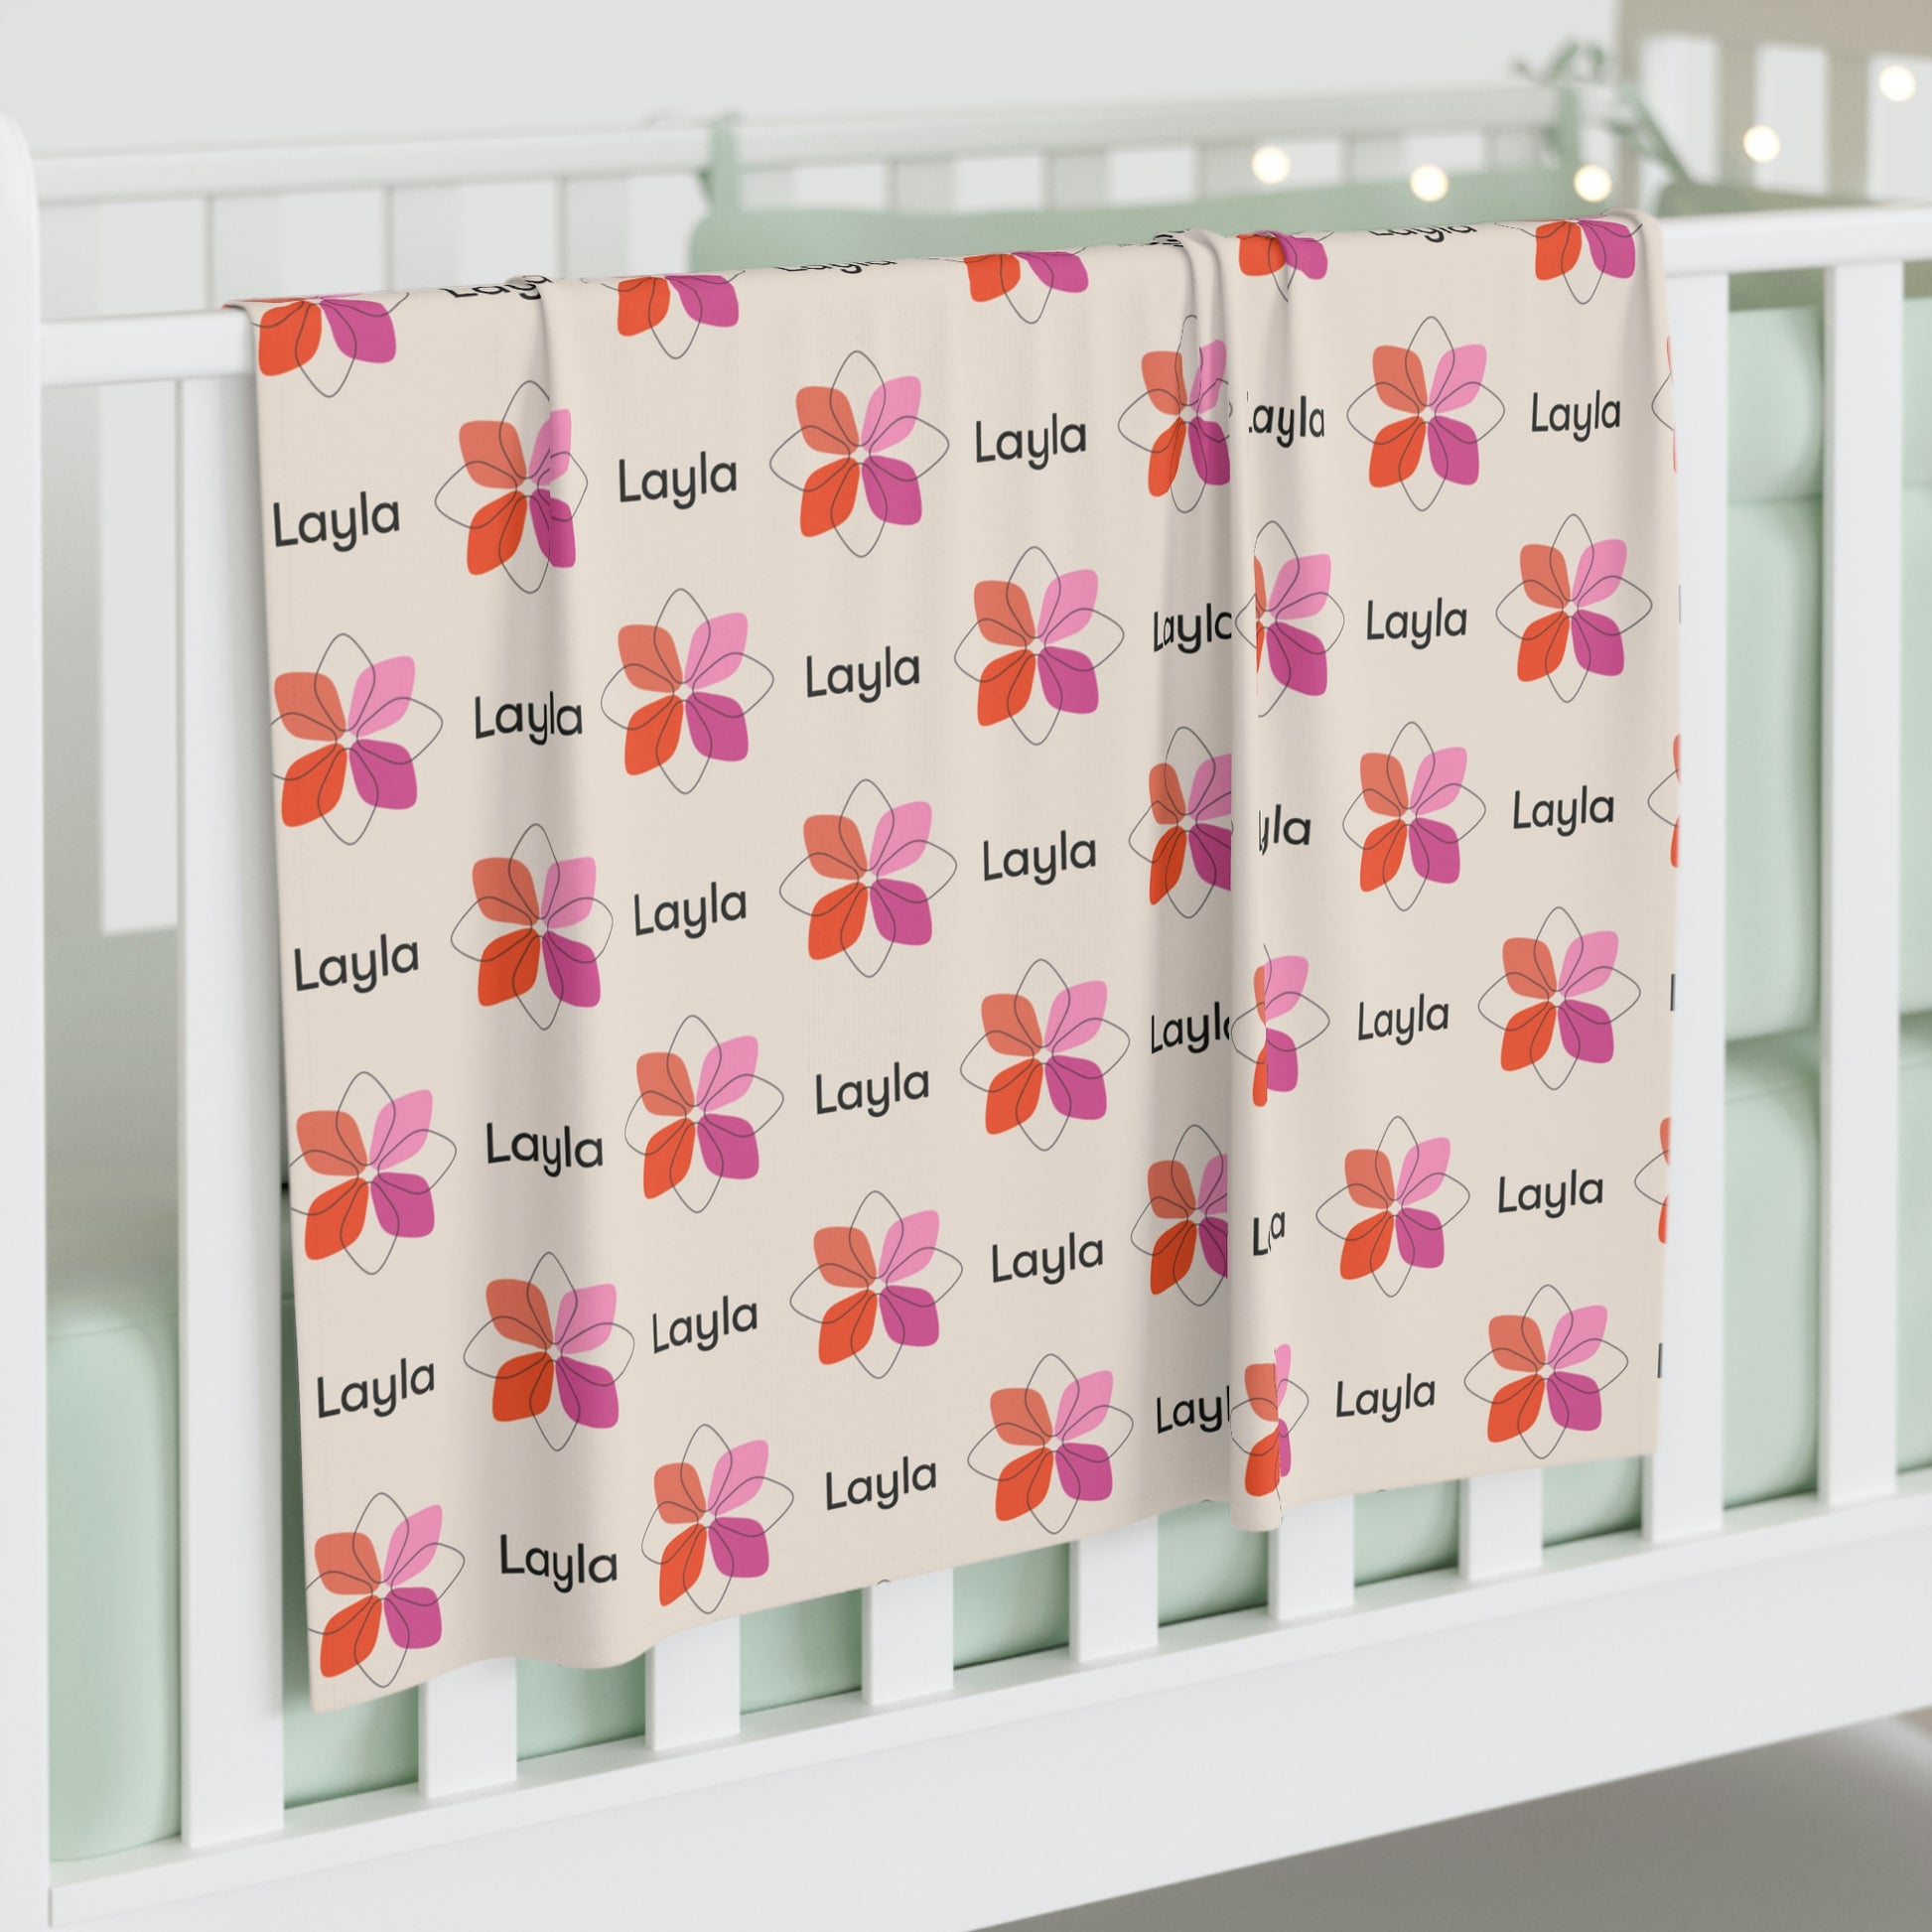 Jersey personalized baby blanket in pink boho geometric flower pattern hung over side of white crib